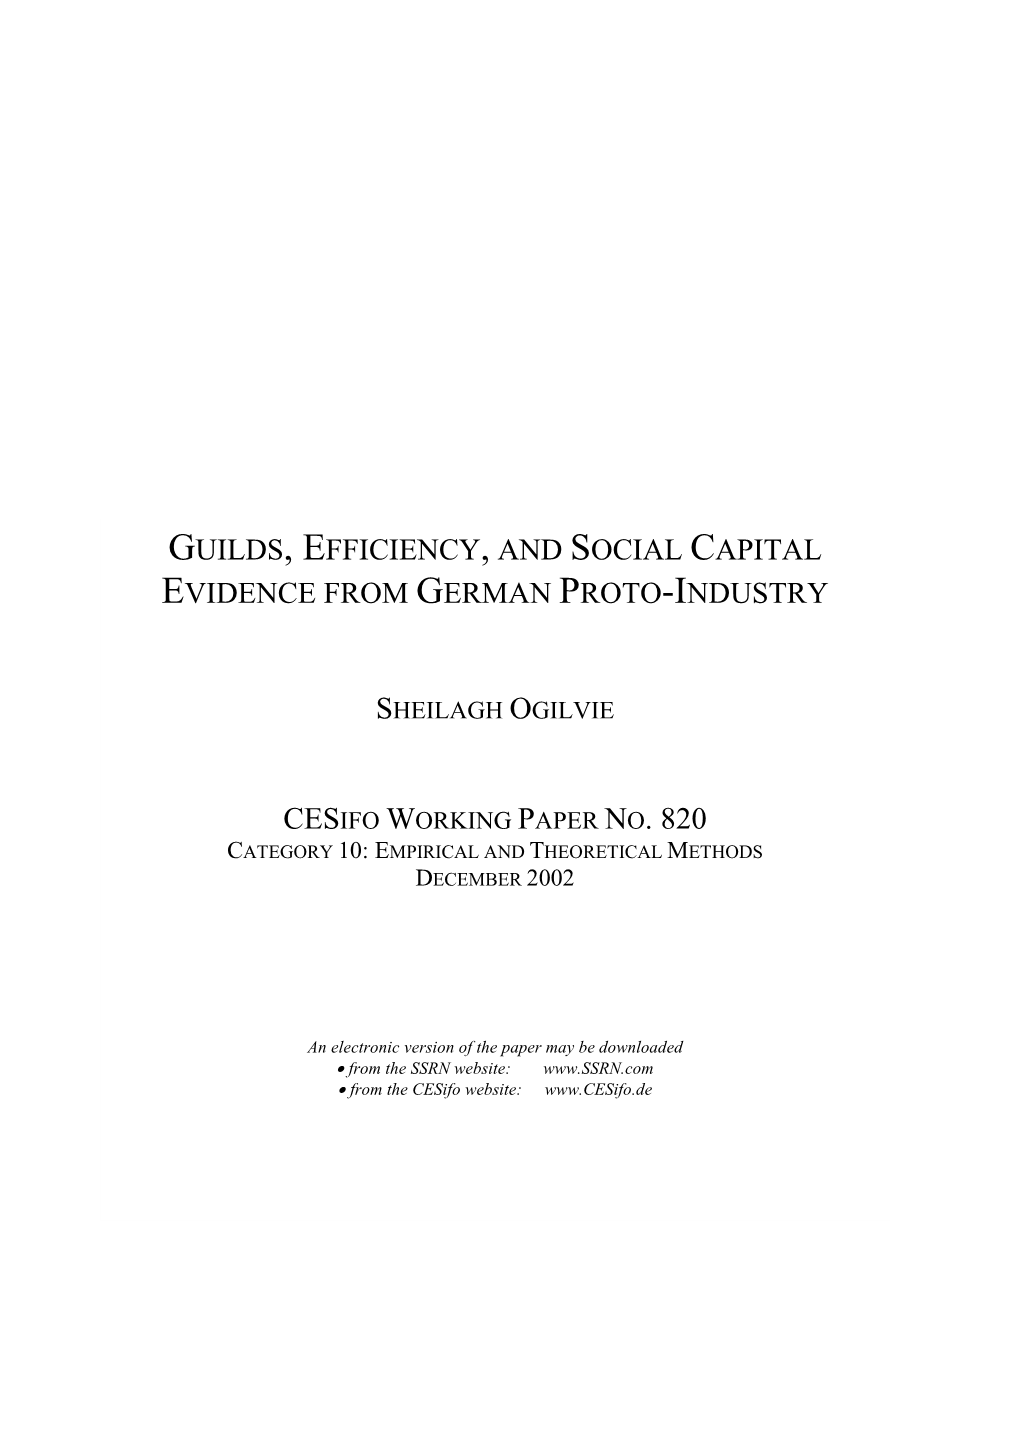 Guilds, Efficiency, and Social Capital Evidence from German Proto-Industry